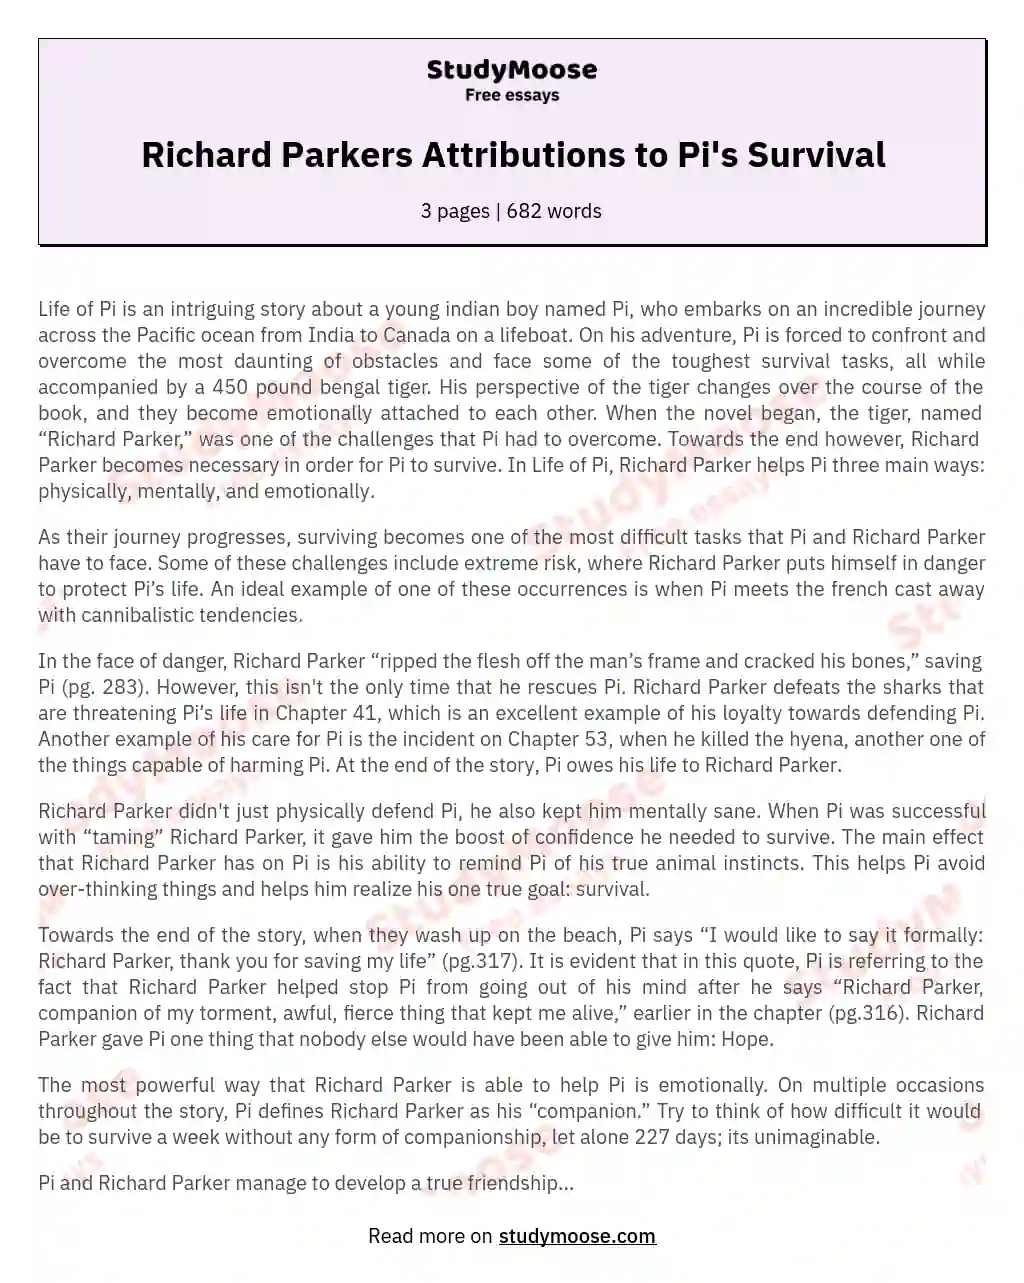 Richard Parkers Attributions to Pi's Survival essay